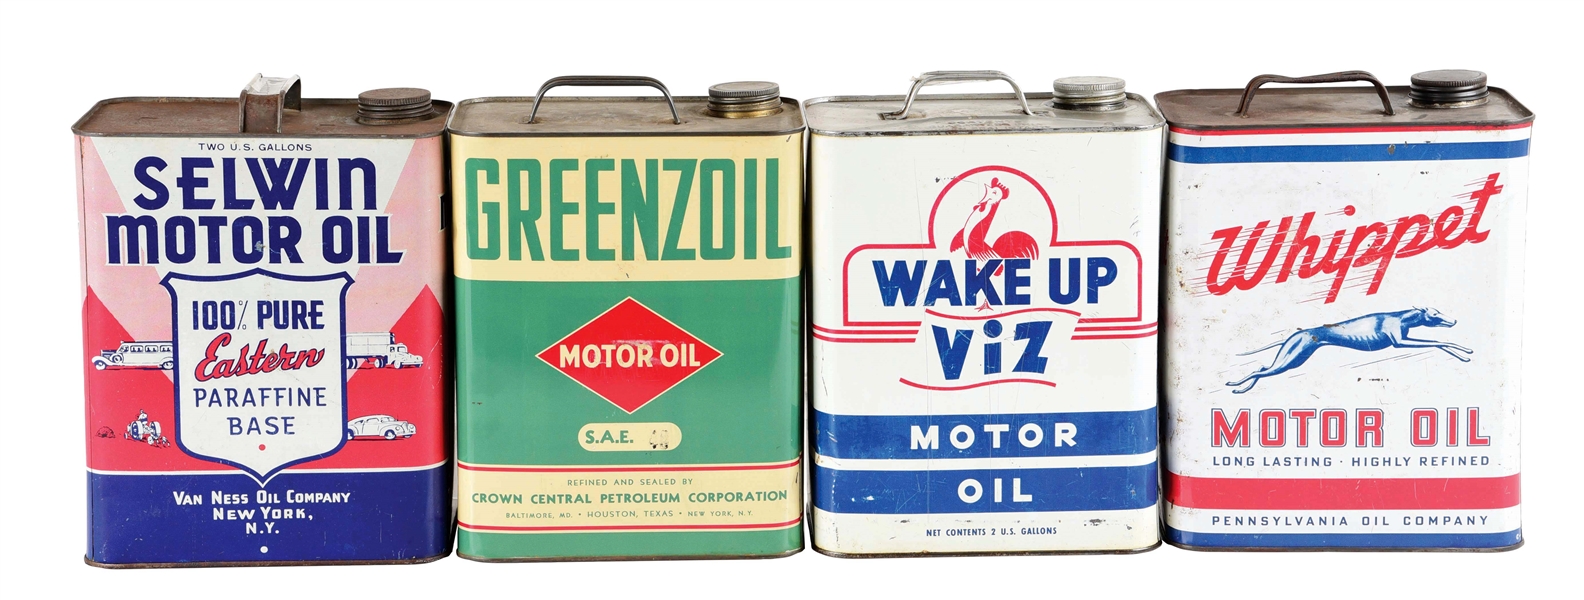 LOT OF 4: TWO GALLON OIL CANS FROM SELWIN, GREENZOIL, WIZ & WHIPPETTE MOTOR OILS. 